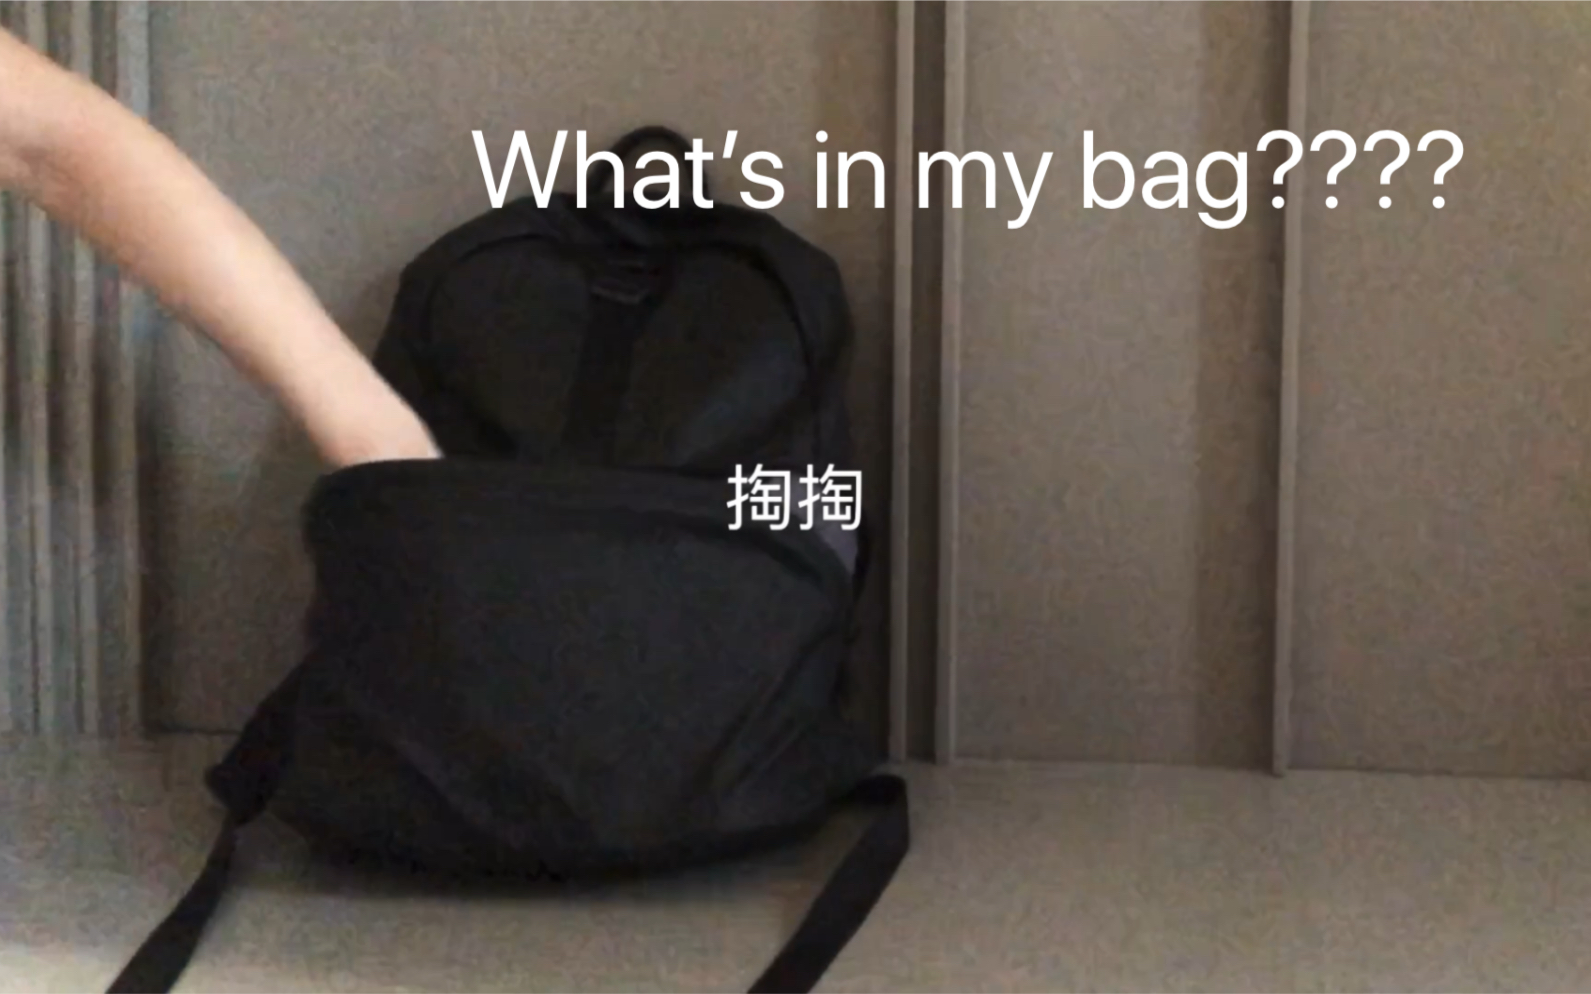 VLOG 开学第一天｜翻包+文具分享 ｜what’s in my bag + stationery collection